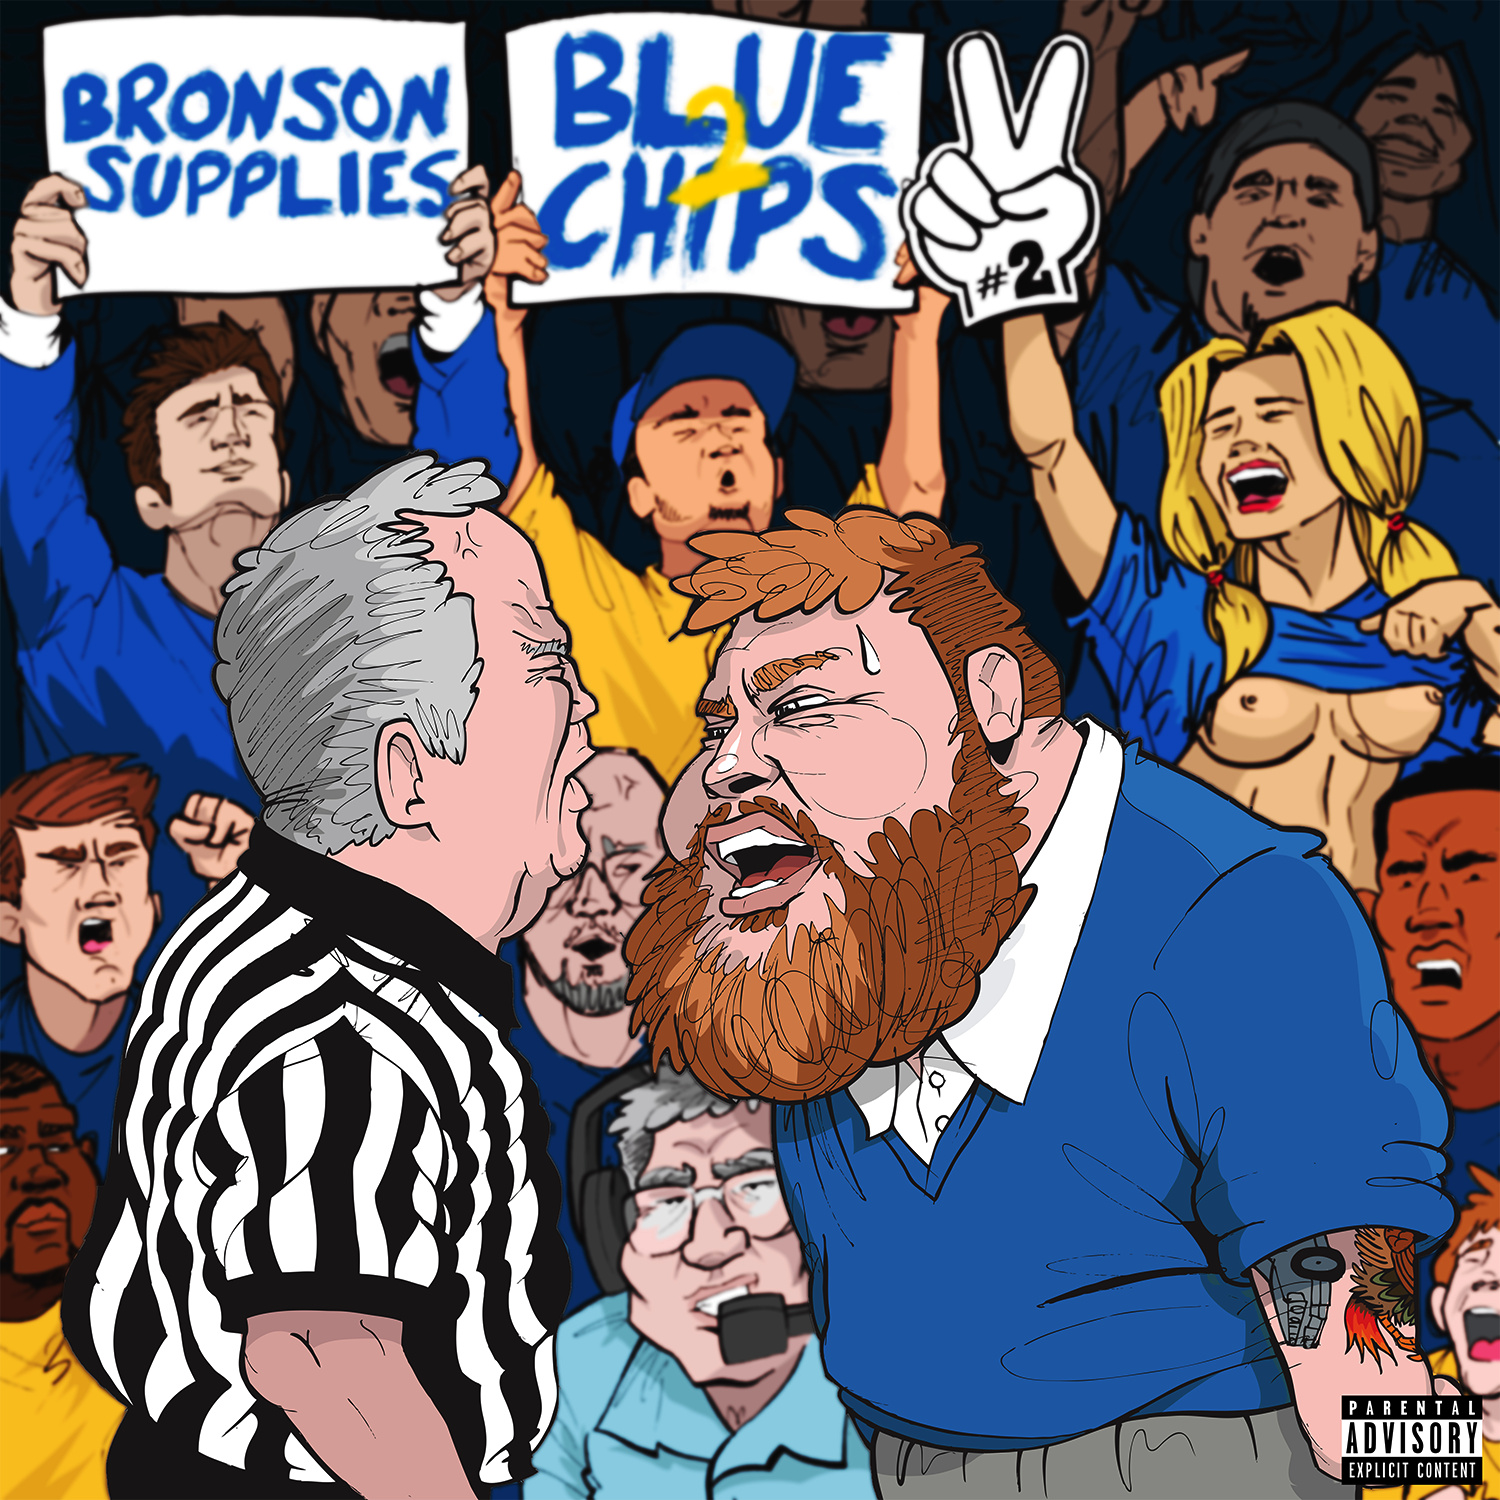 Action Bronson & Party Supplies ~ Blue Chips 2 Mixtape